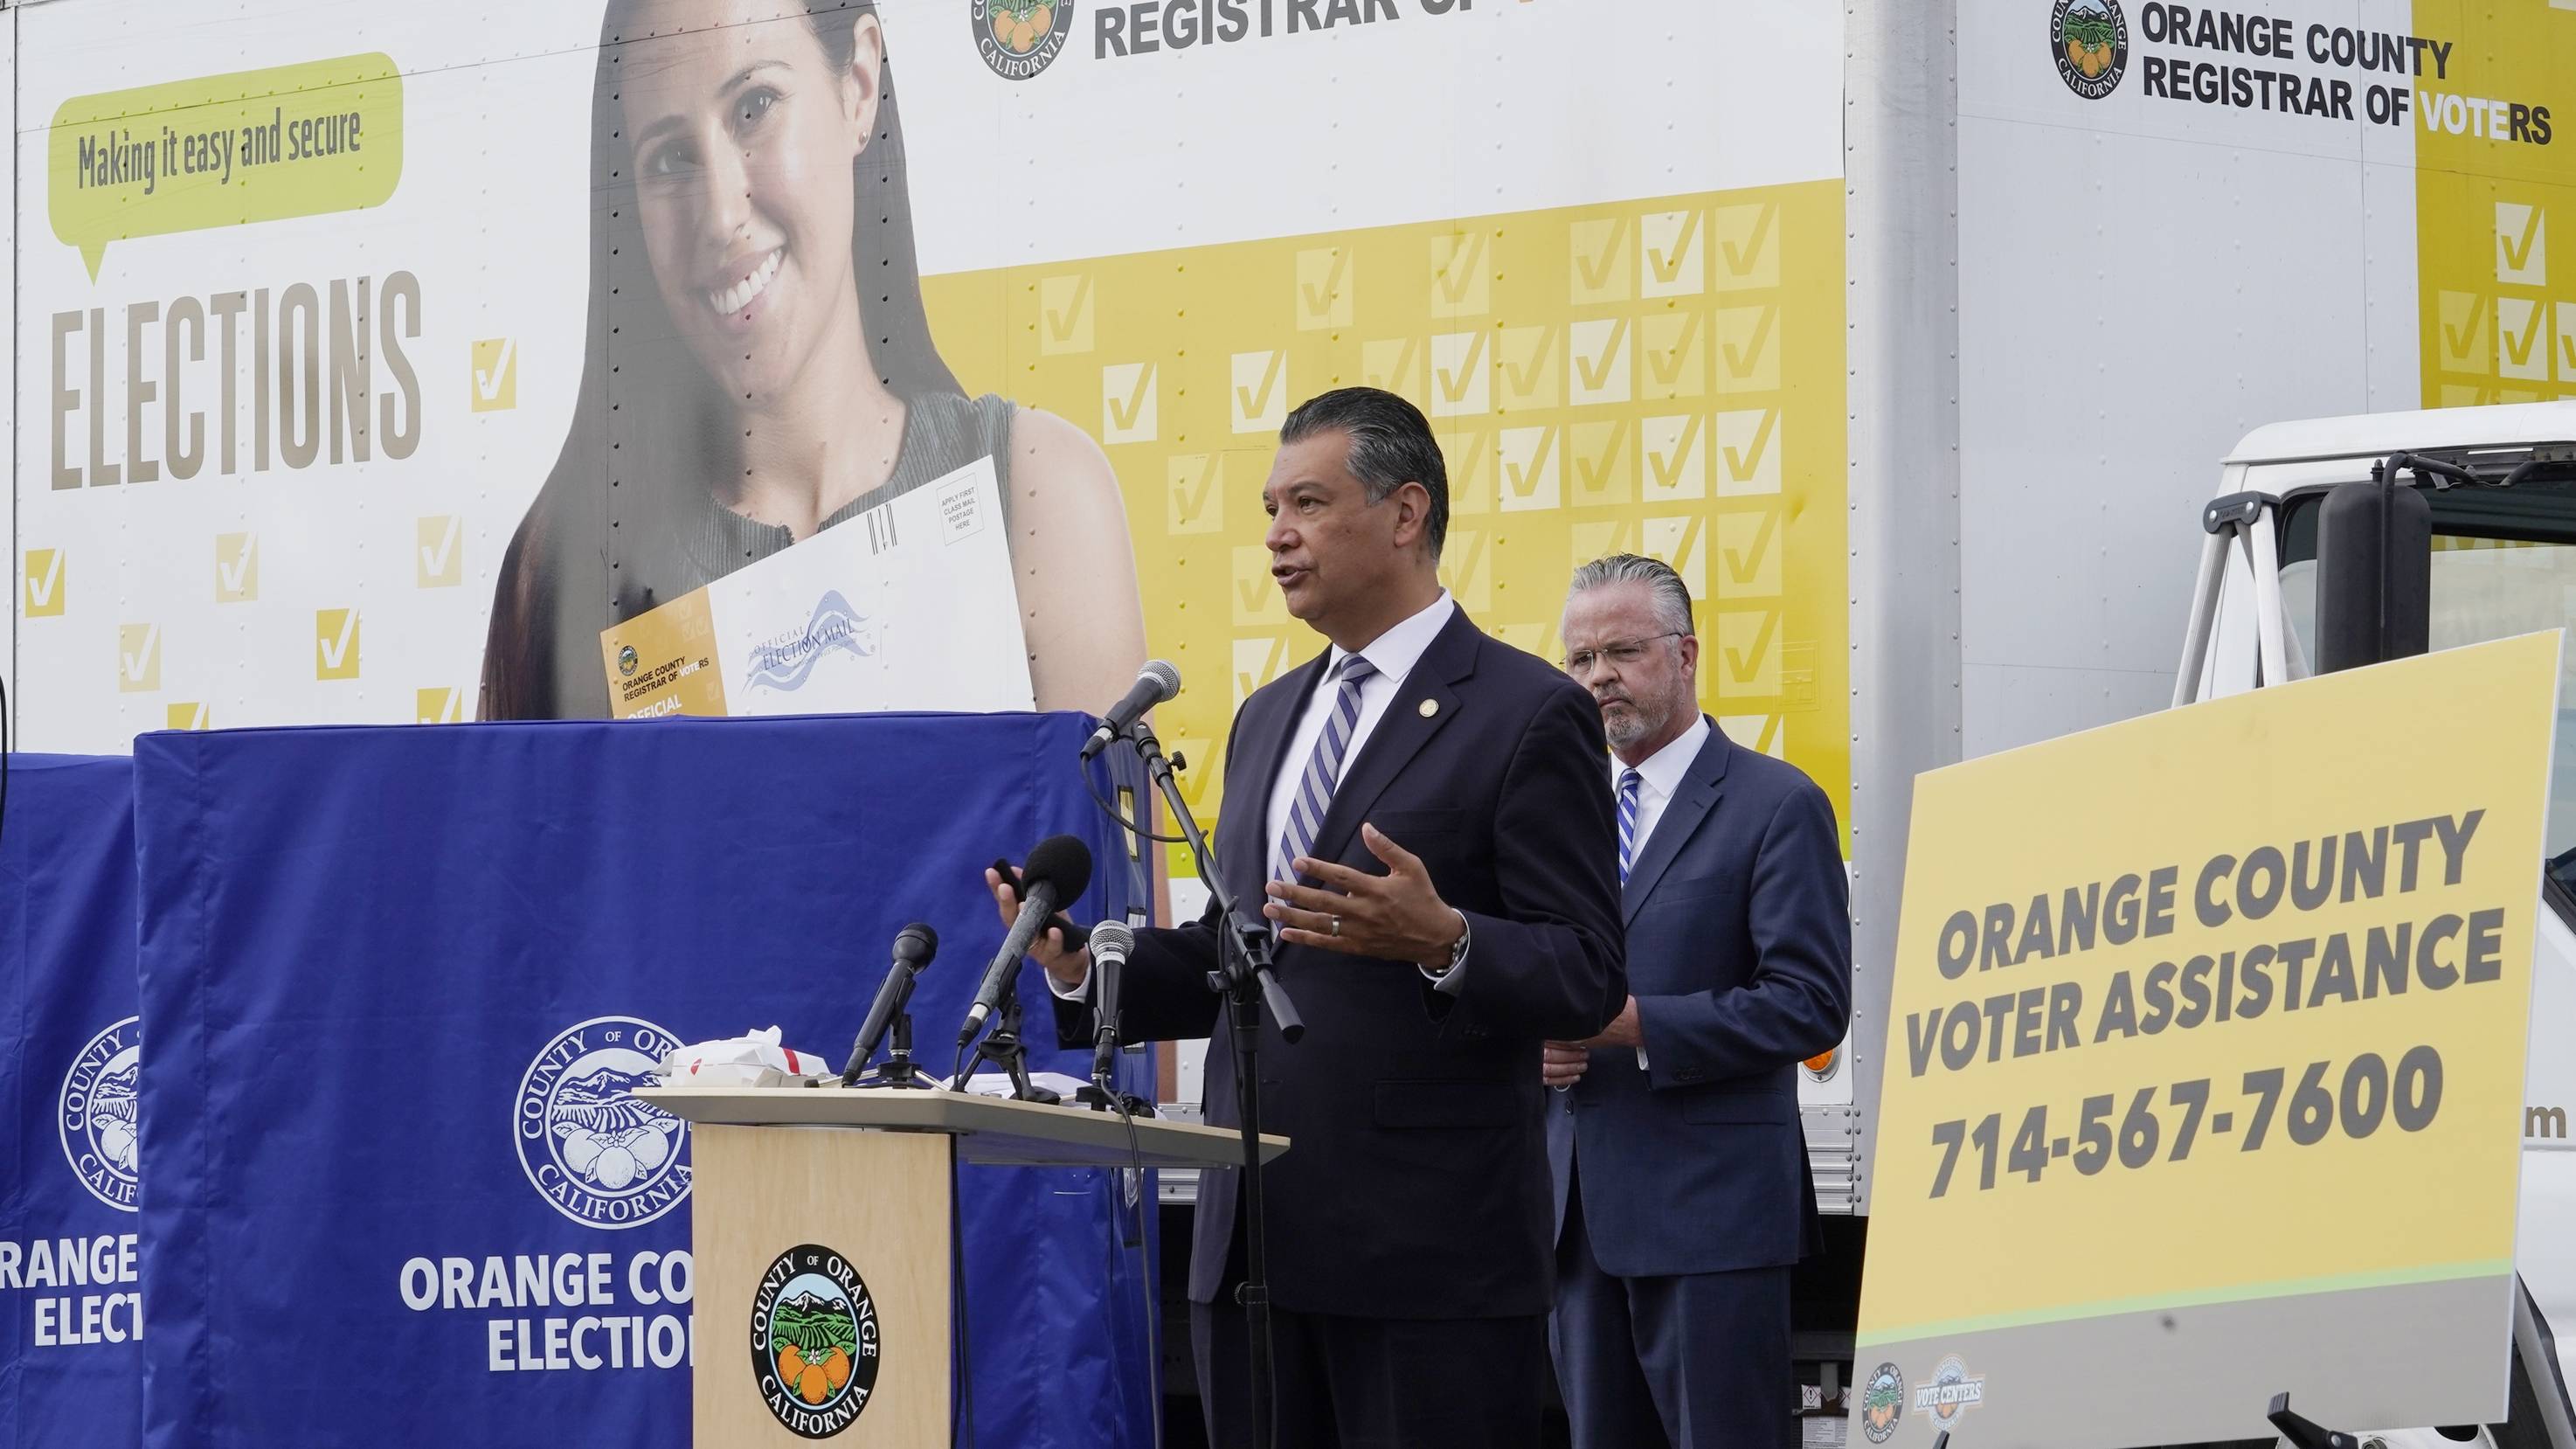 In this Oct. 5, 2020, file photo, California Secretary of State Alex Padilla, left, and Orange County Registrar of Voters Neal Kelley hold a news conference on Orange County's comprehensive plans to safeguard the election and provide transparency in Santa Ana, Calif. (AP Photo/Damian Dovarganes, File)